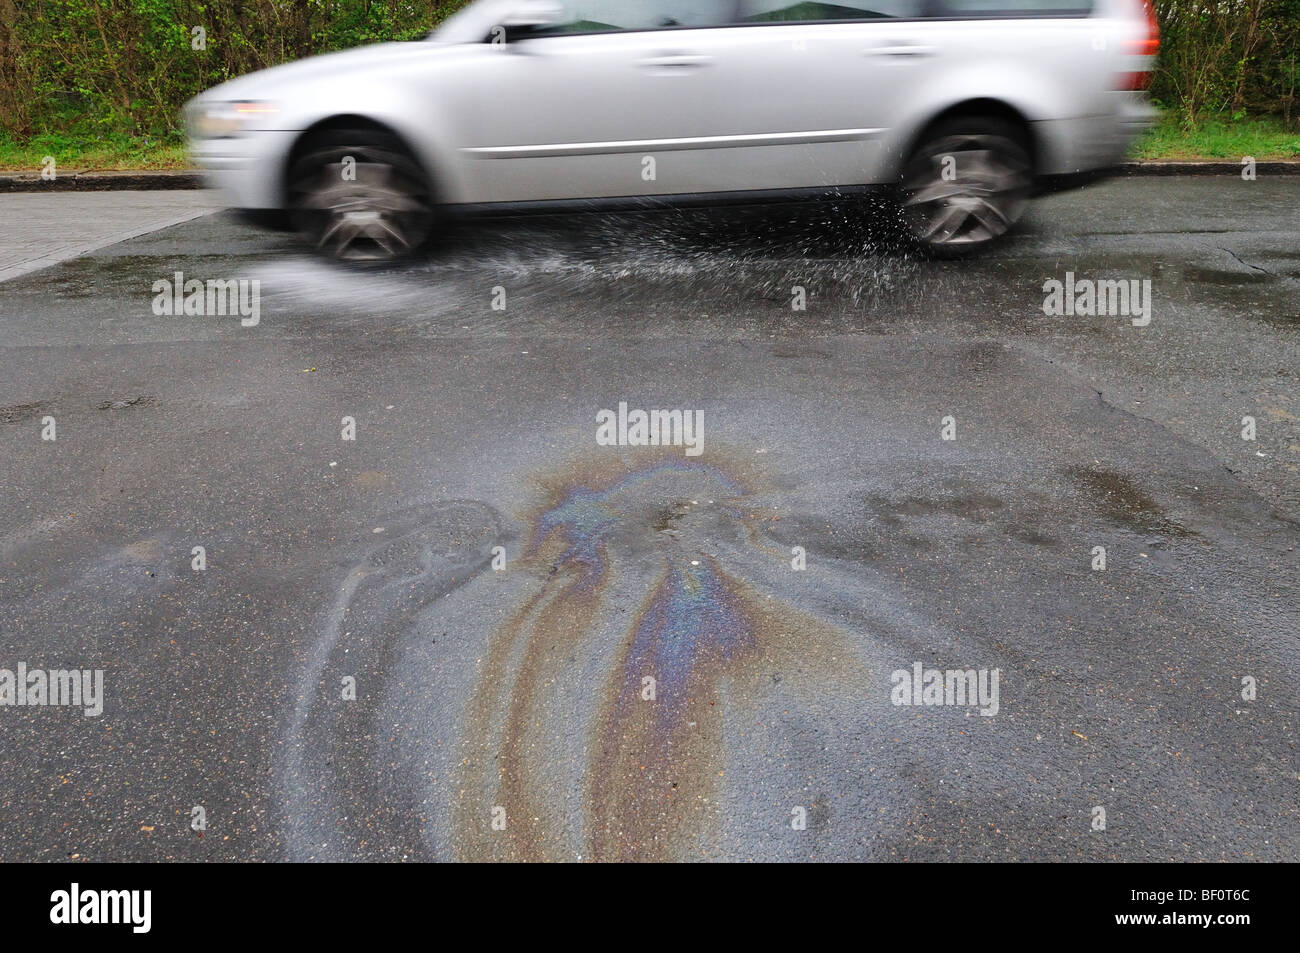 Oil slick on the road Stock Photo